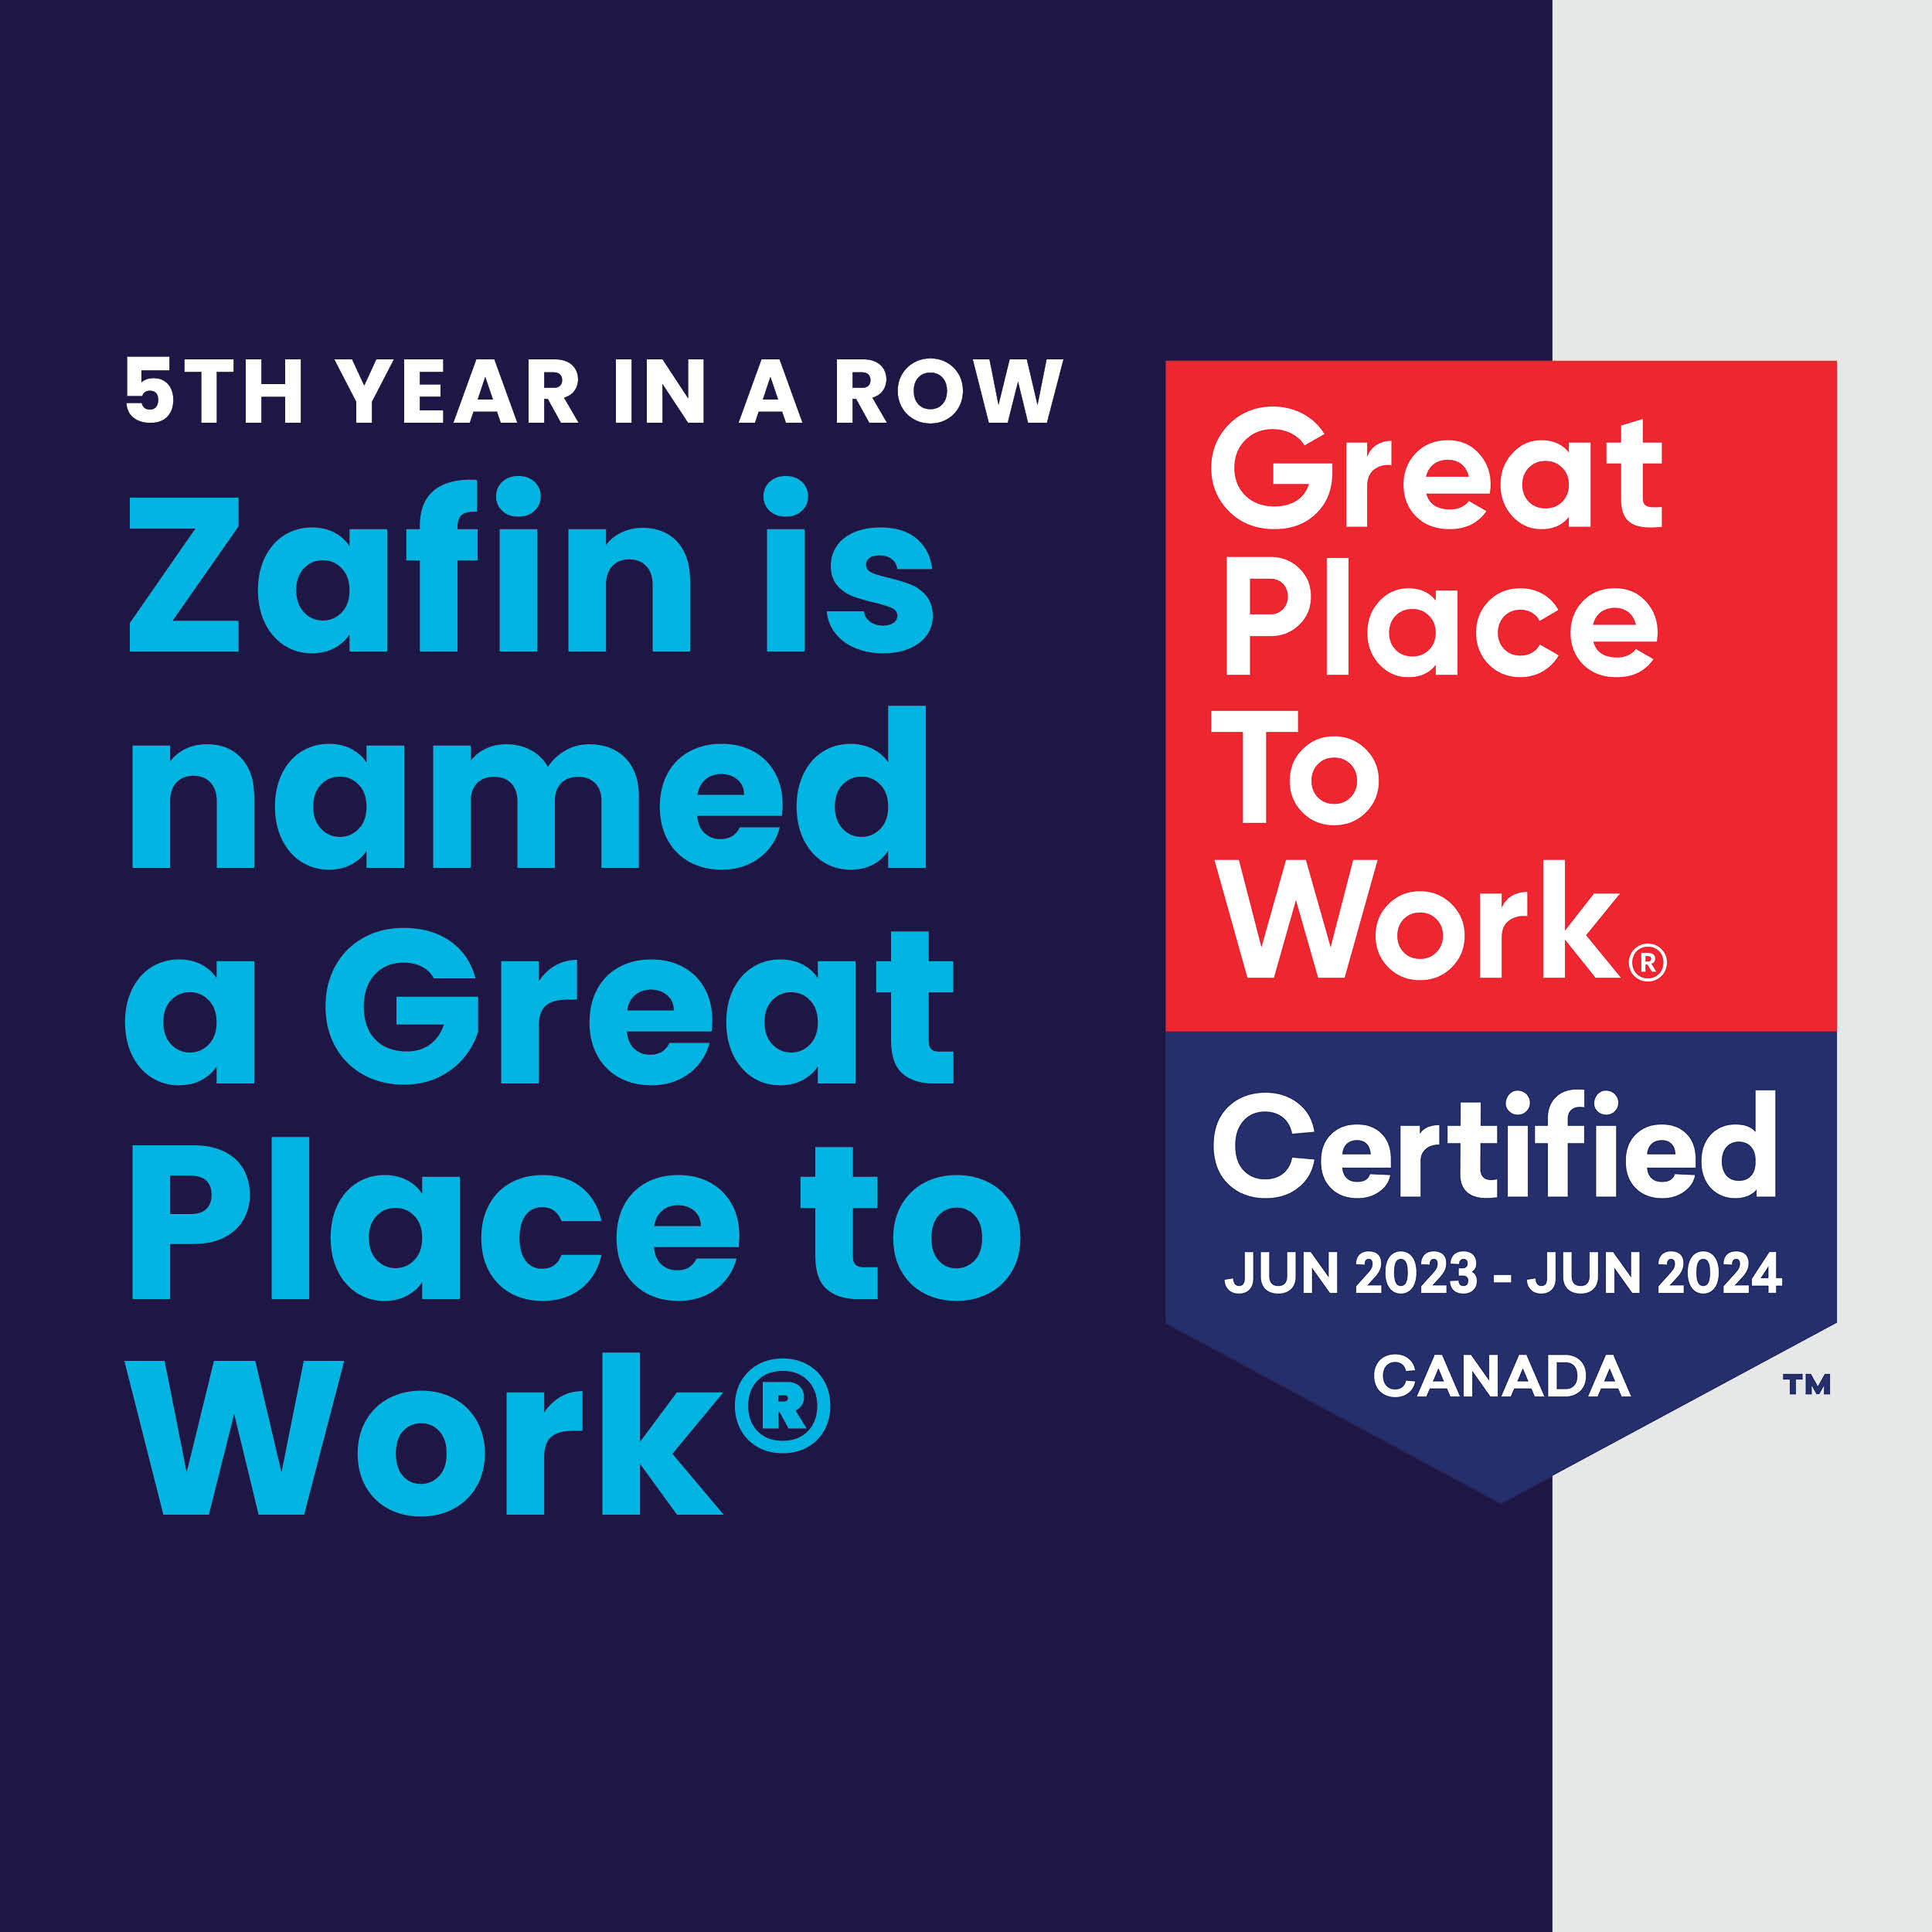 Zafin is named a Great Place to Work fifth year in a row.